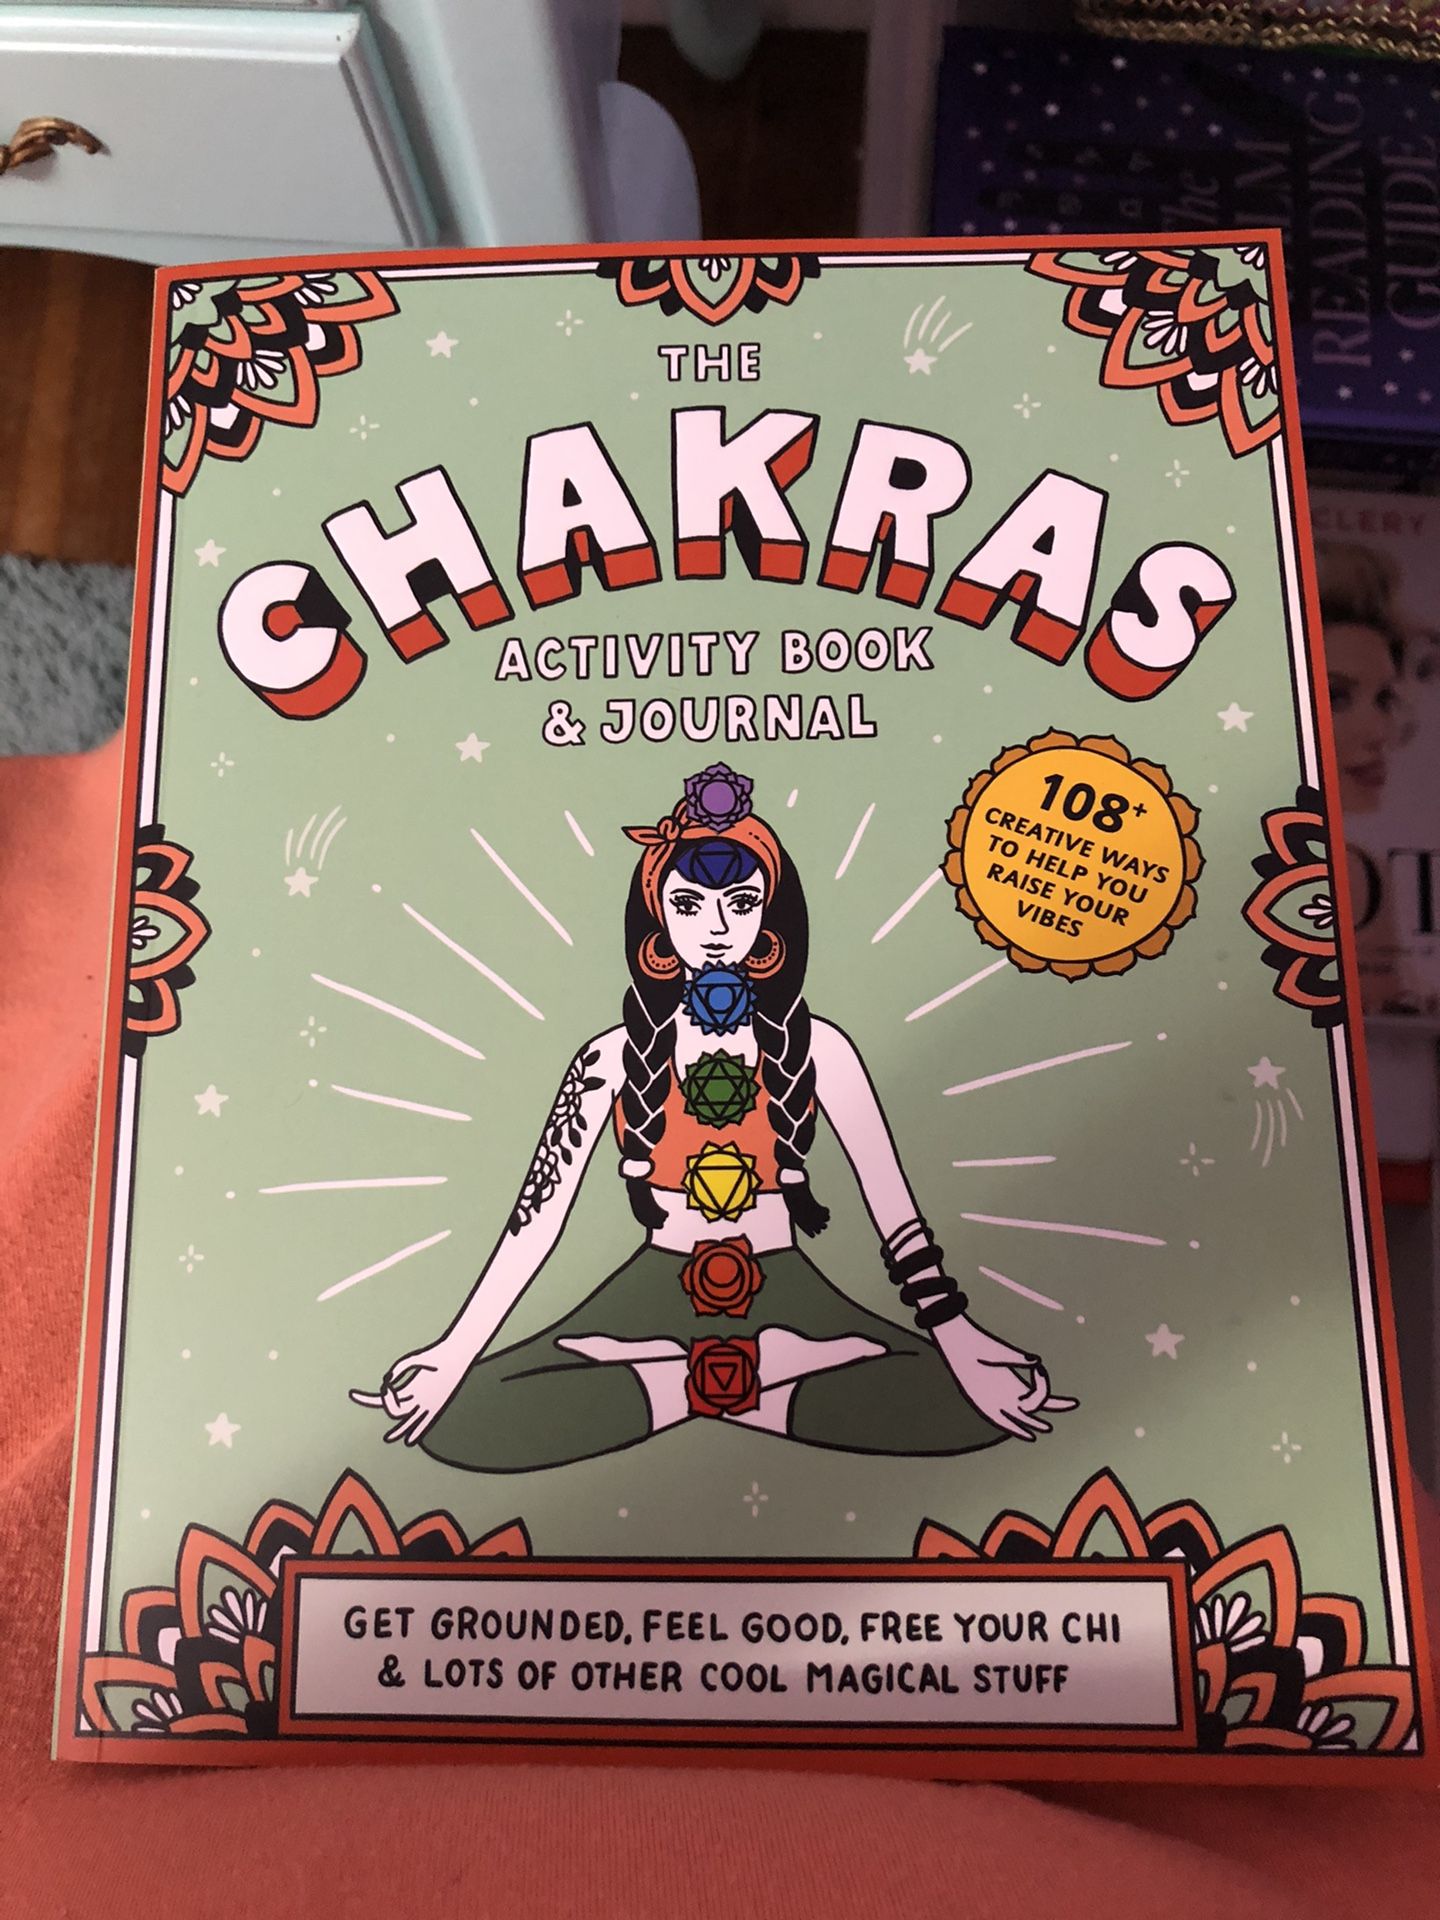 The chakras activity book and journal